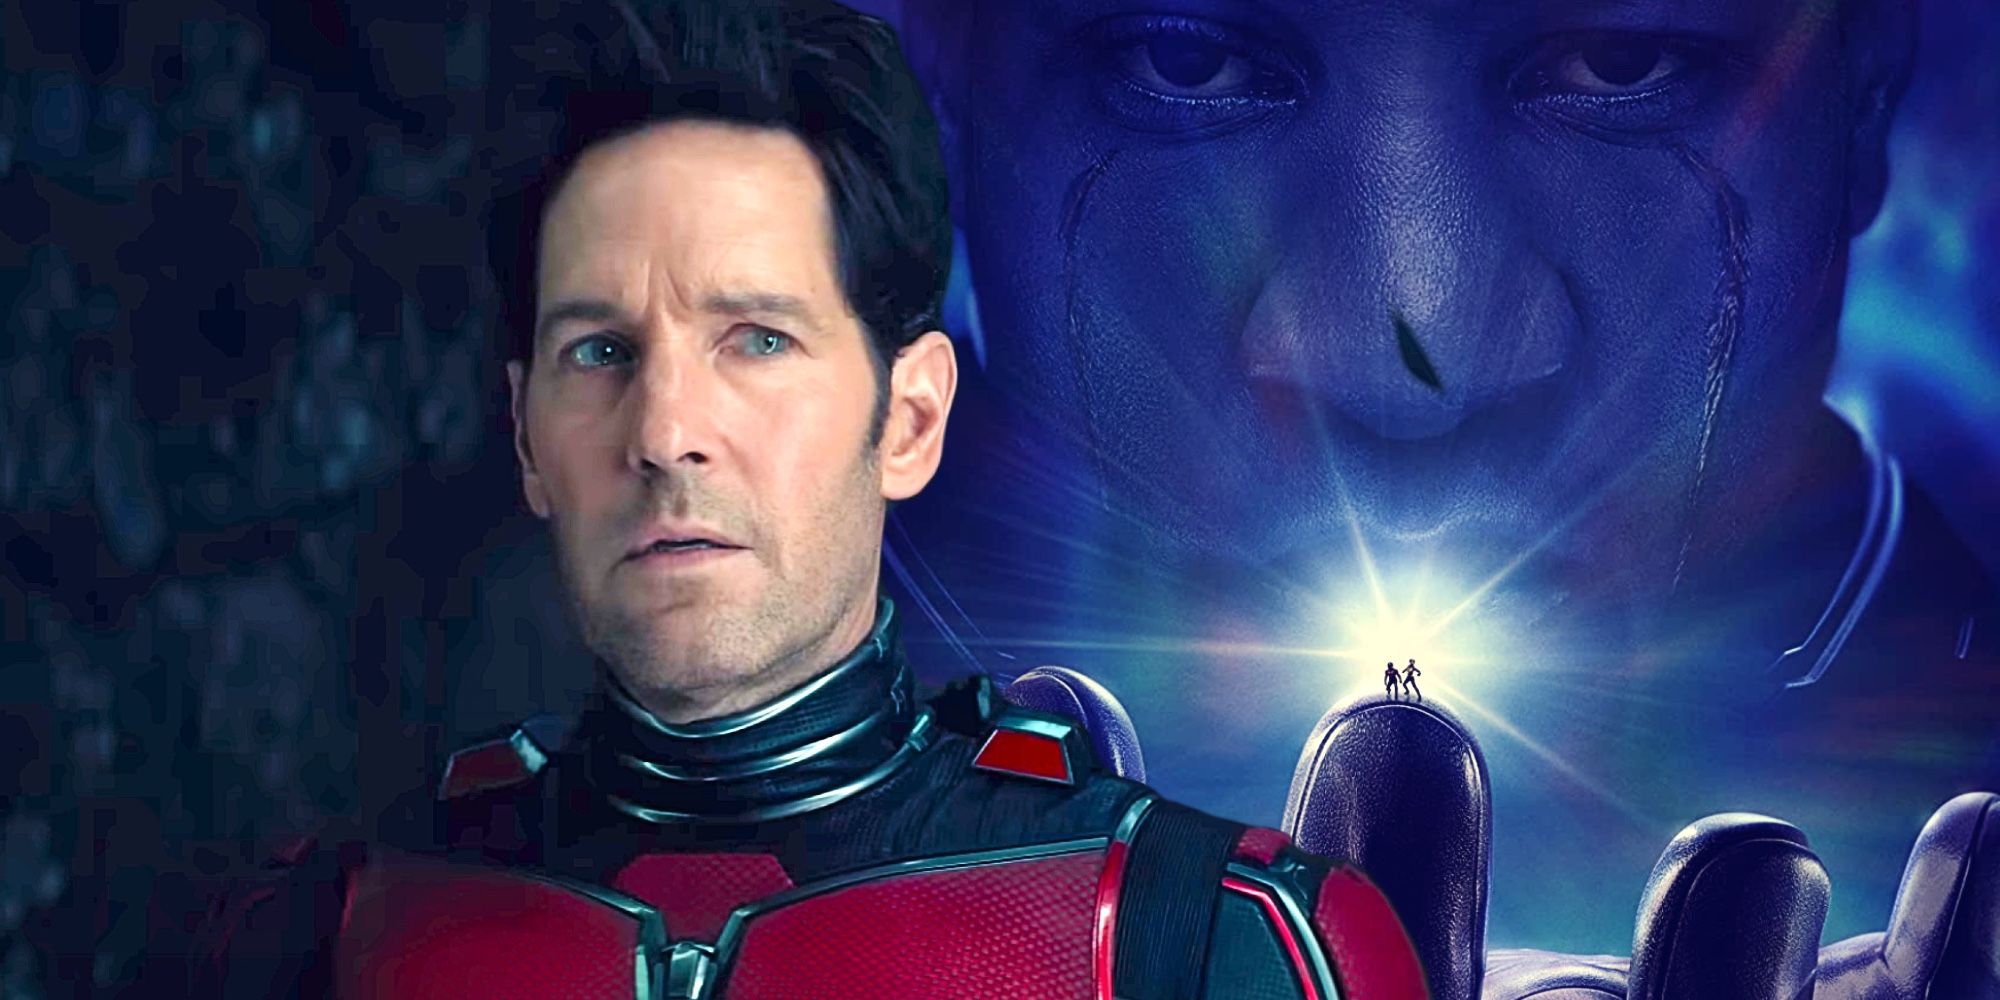 Paul Rudd as Scott Lang/Ant-Man in front of Ant-Man 3 poster